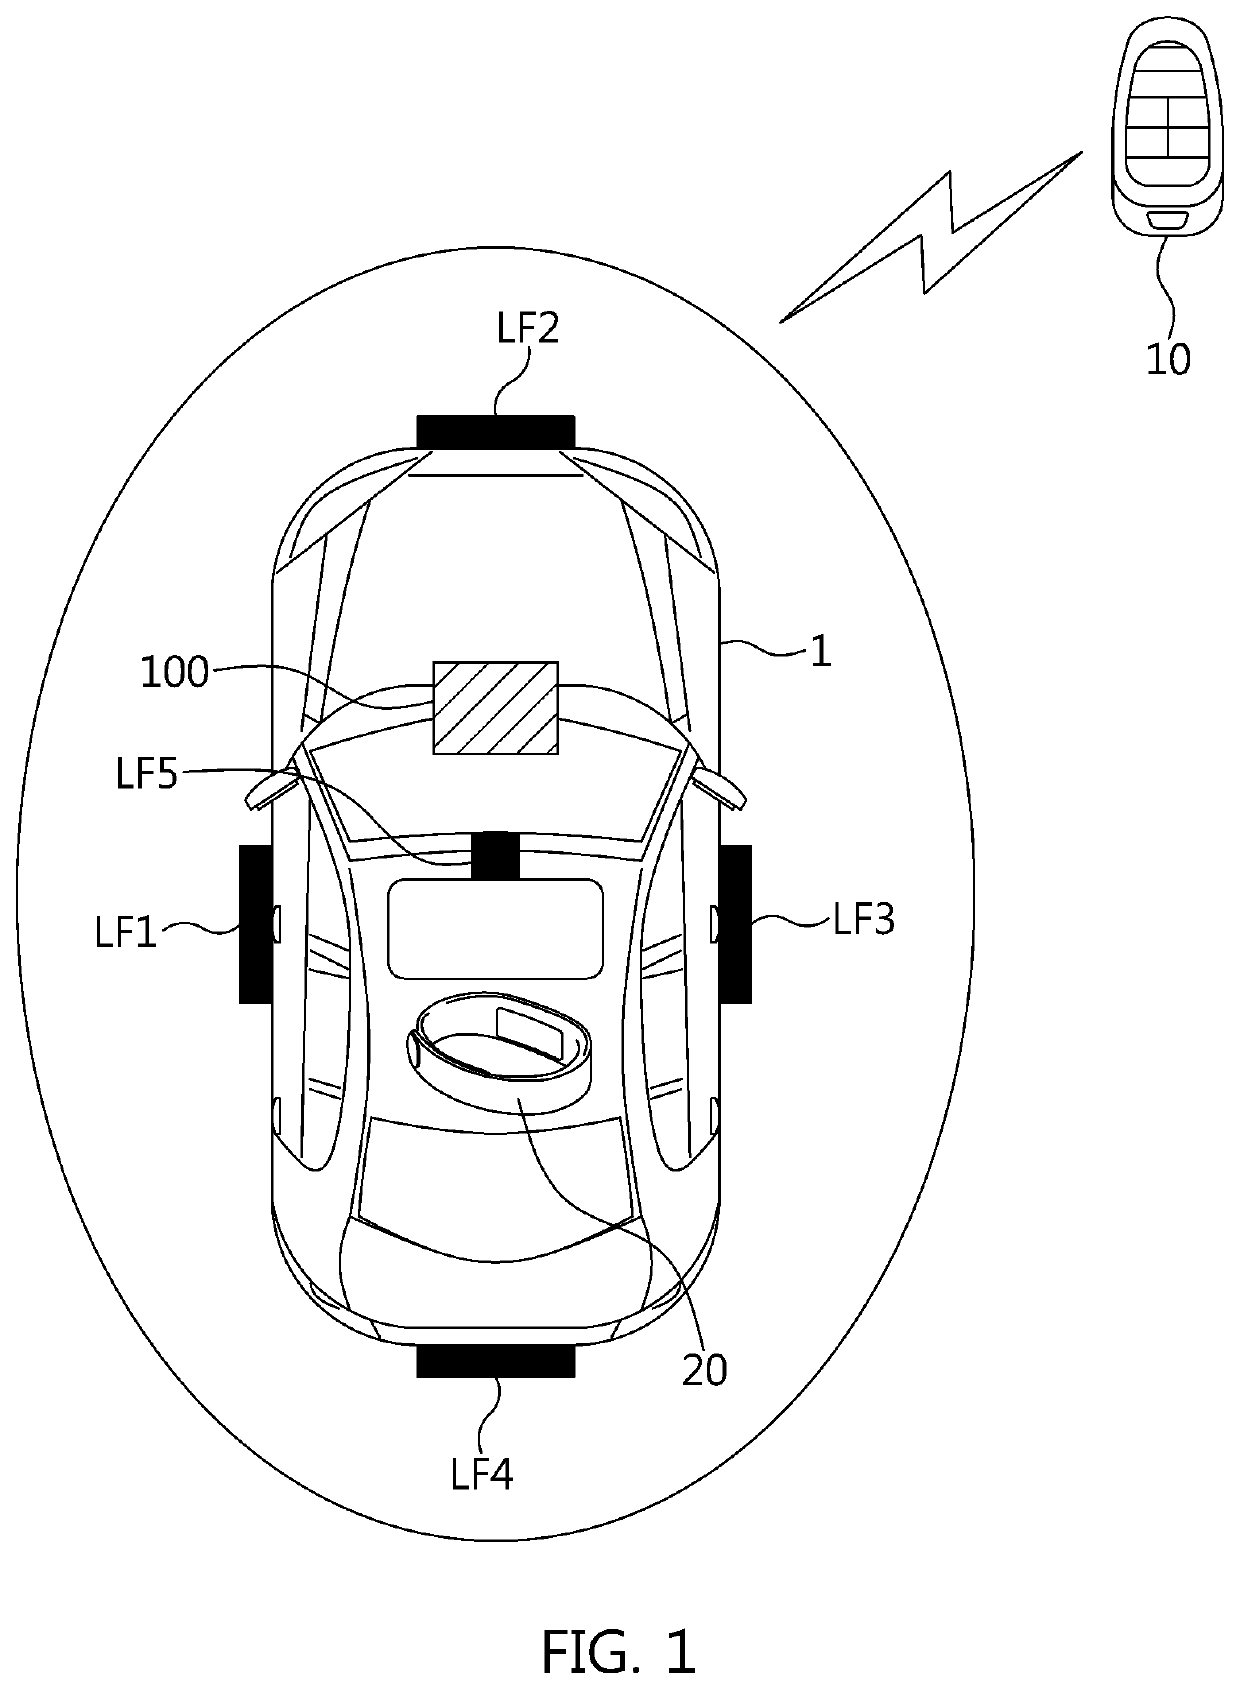 REAR OCCUPANT ALERT METHOD AND VEHICLE fob DEVICE USING THE SAME